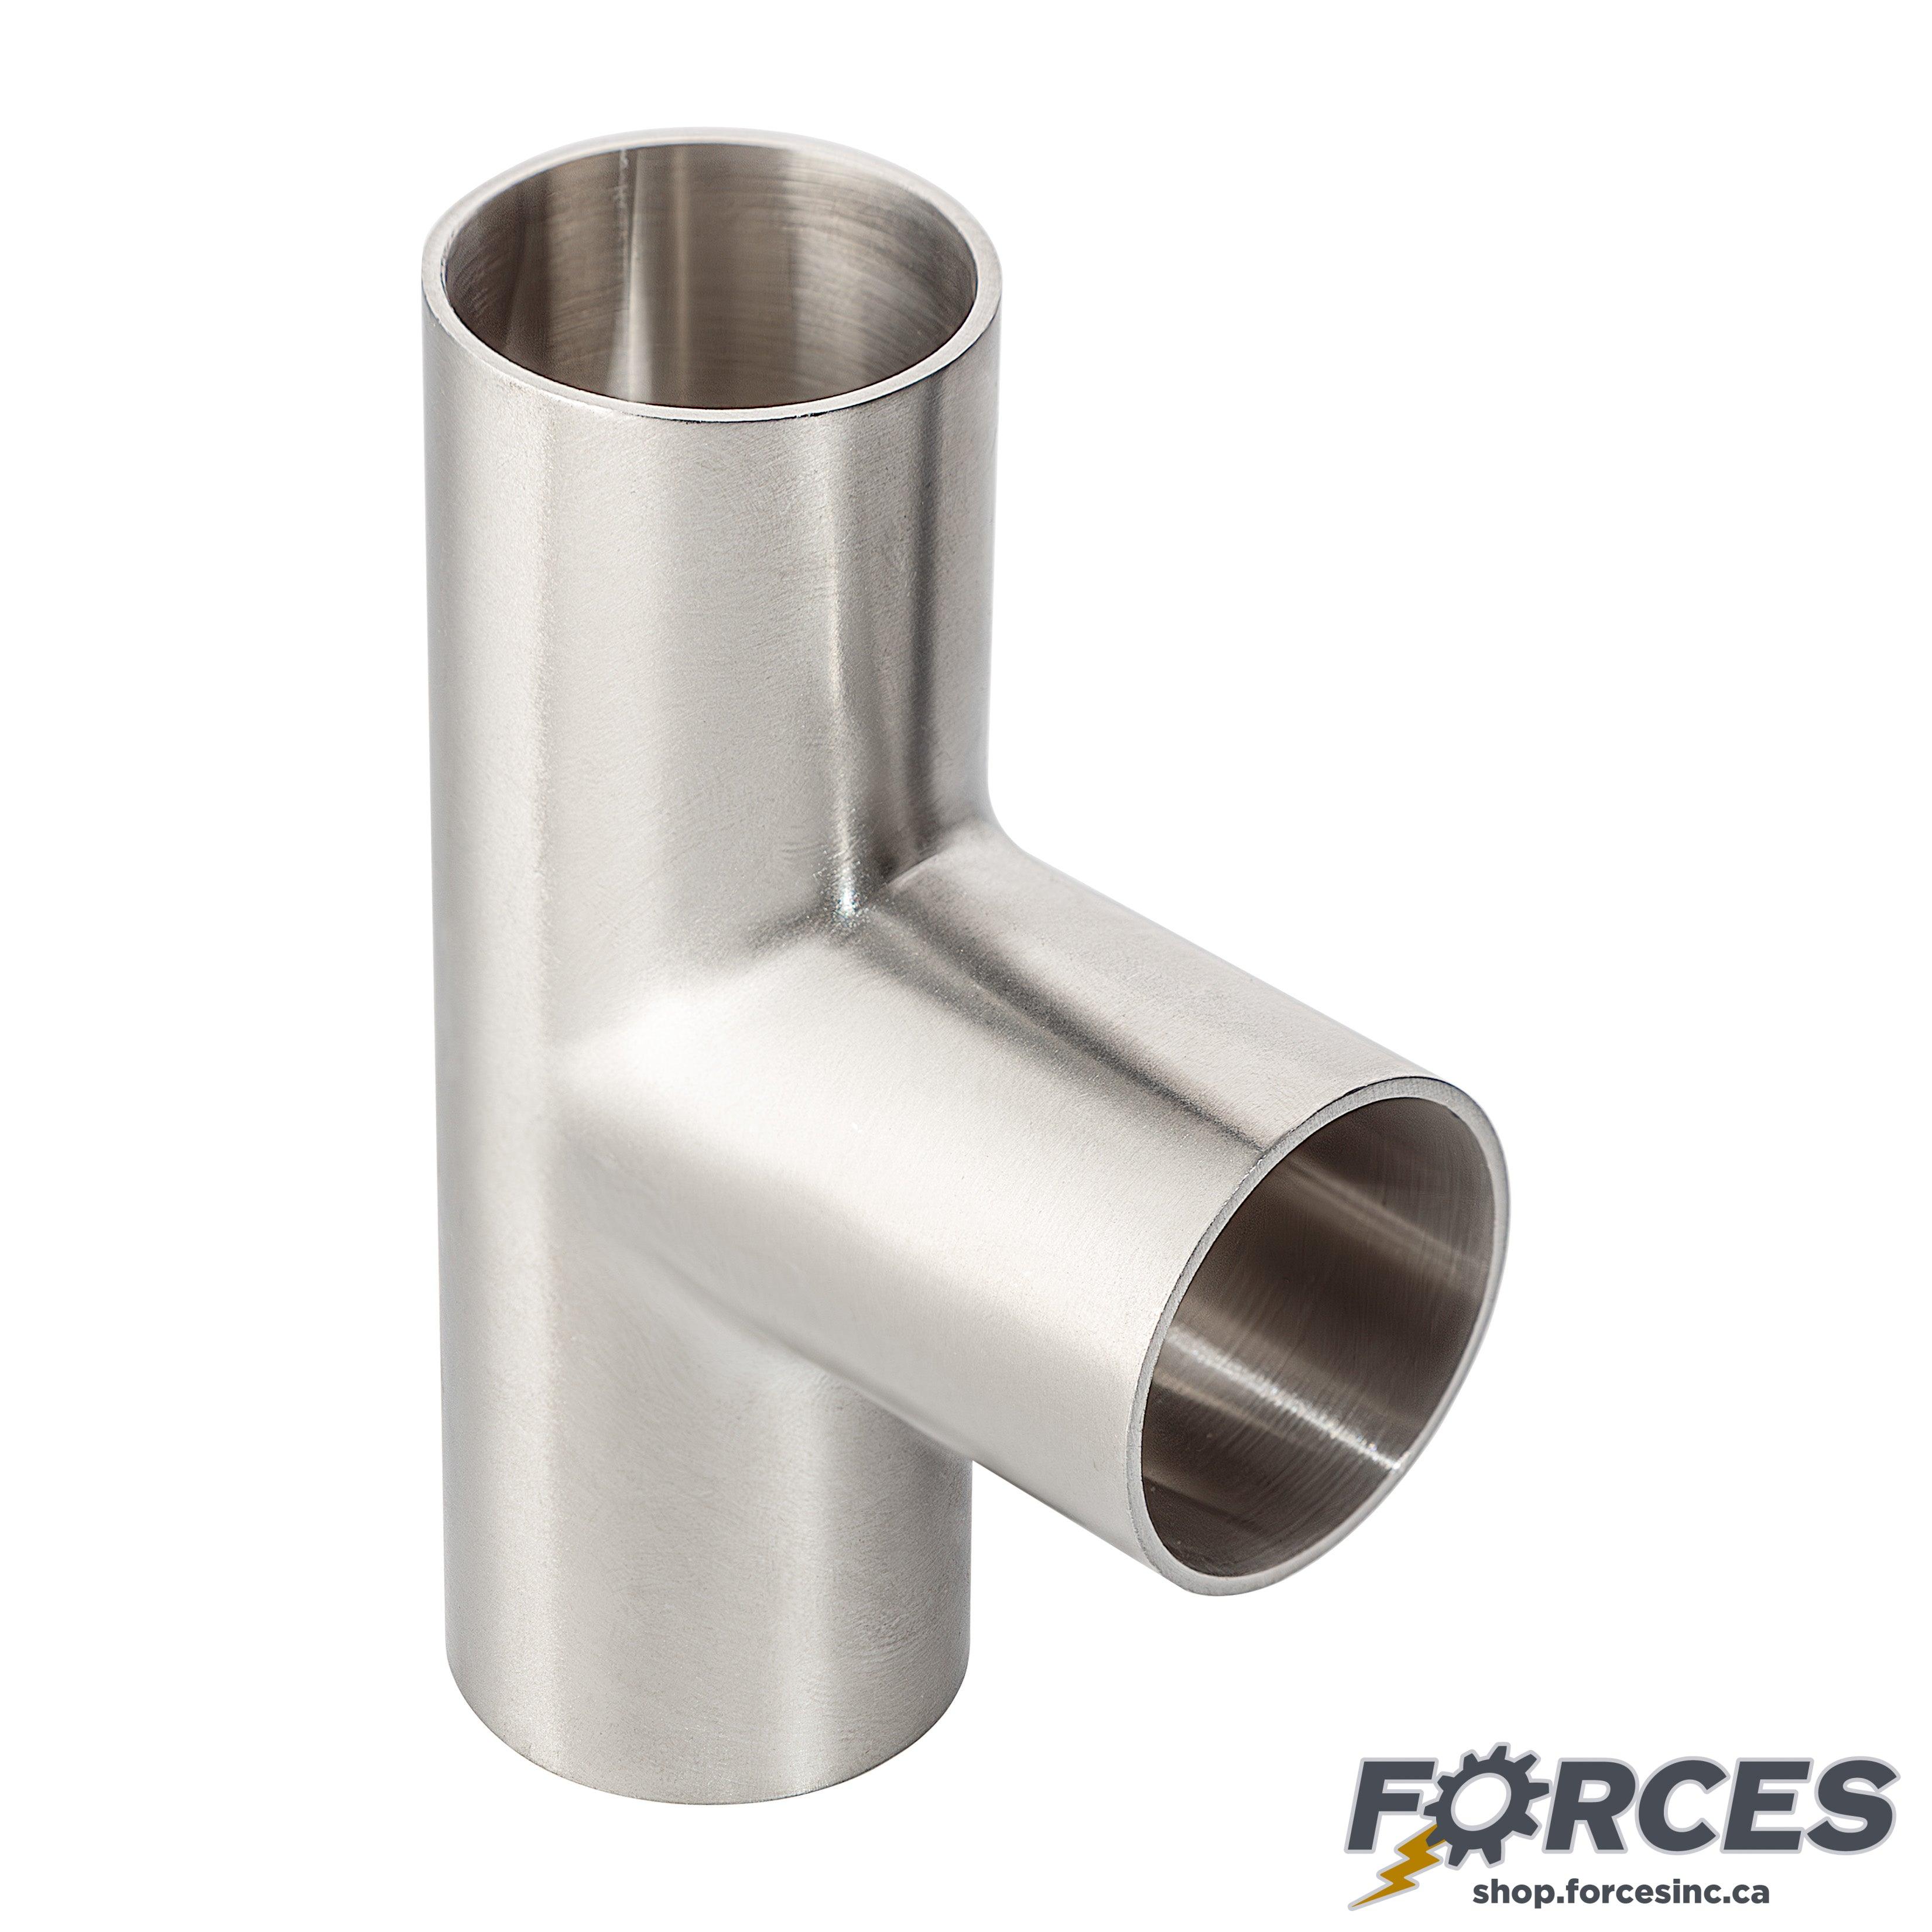 3/4" Butt Weld Long Tee - Stainless Steel 316 - Forces Inc